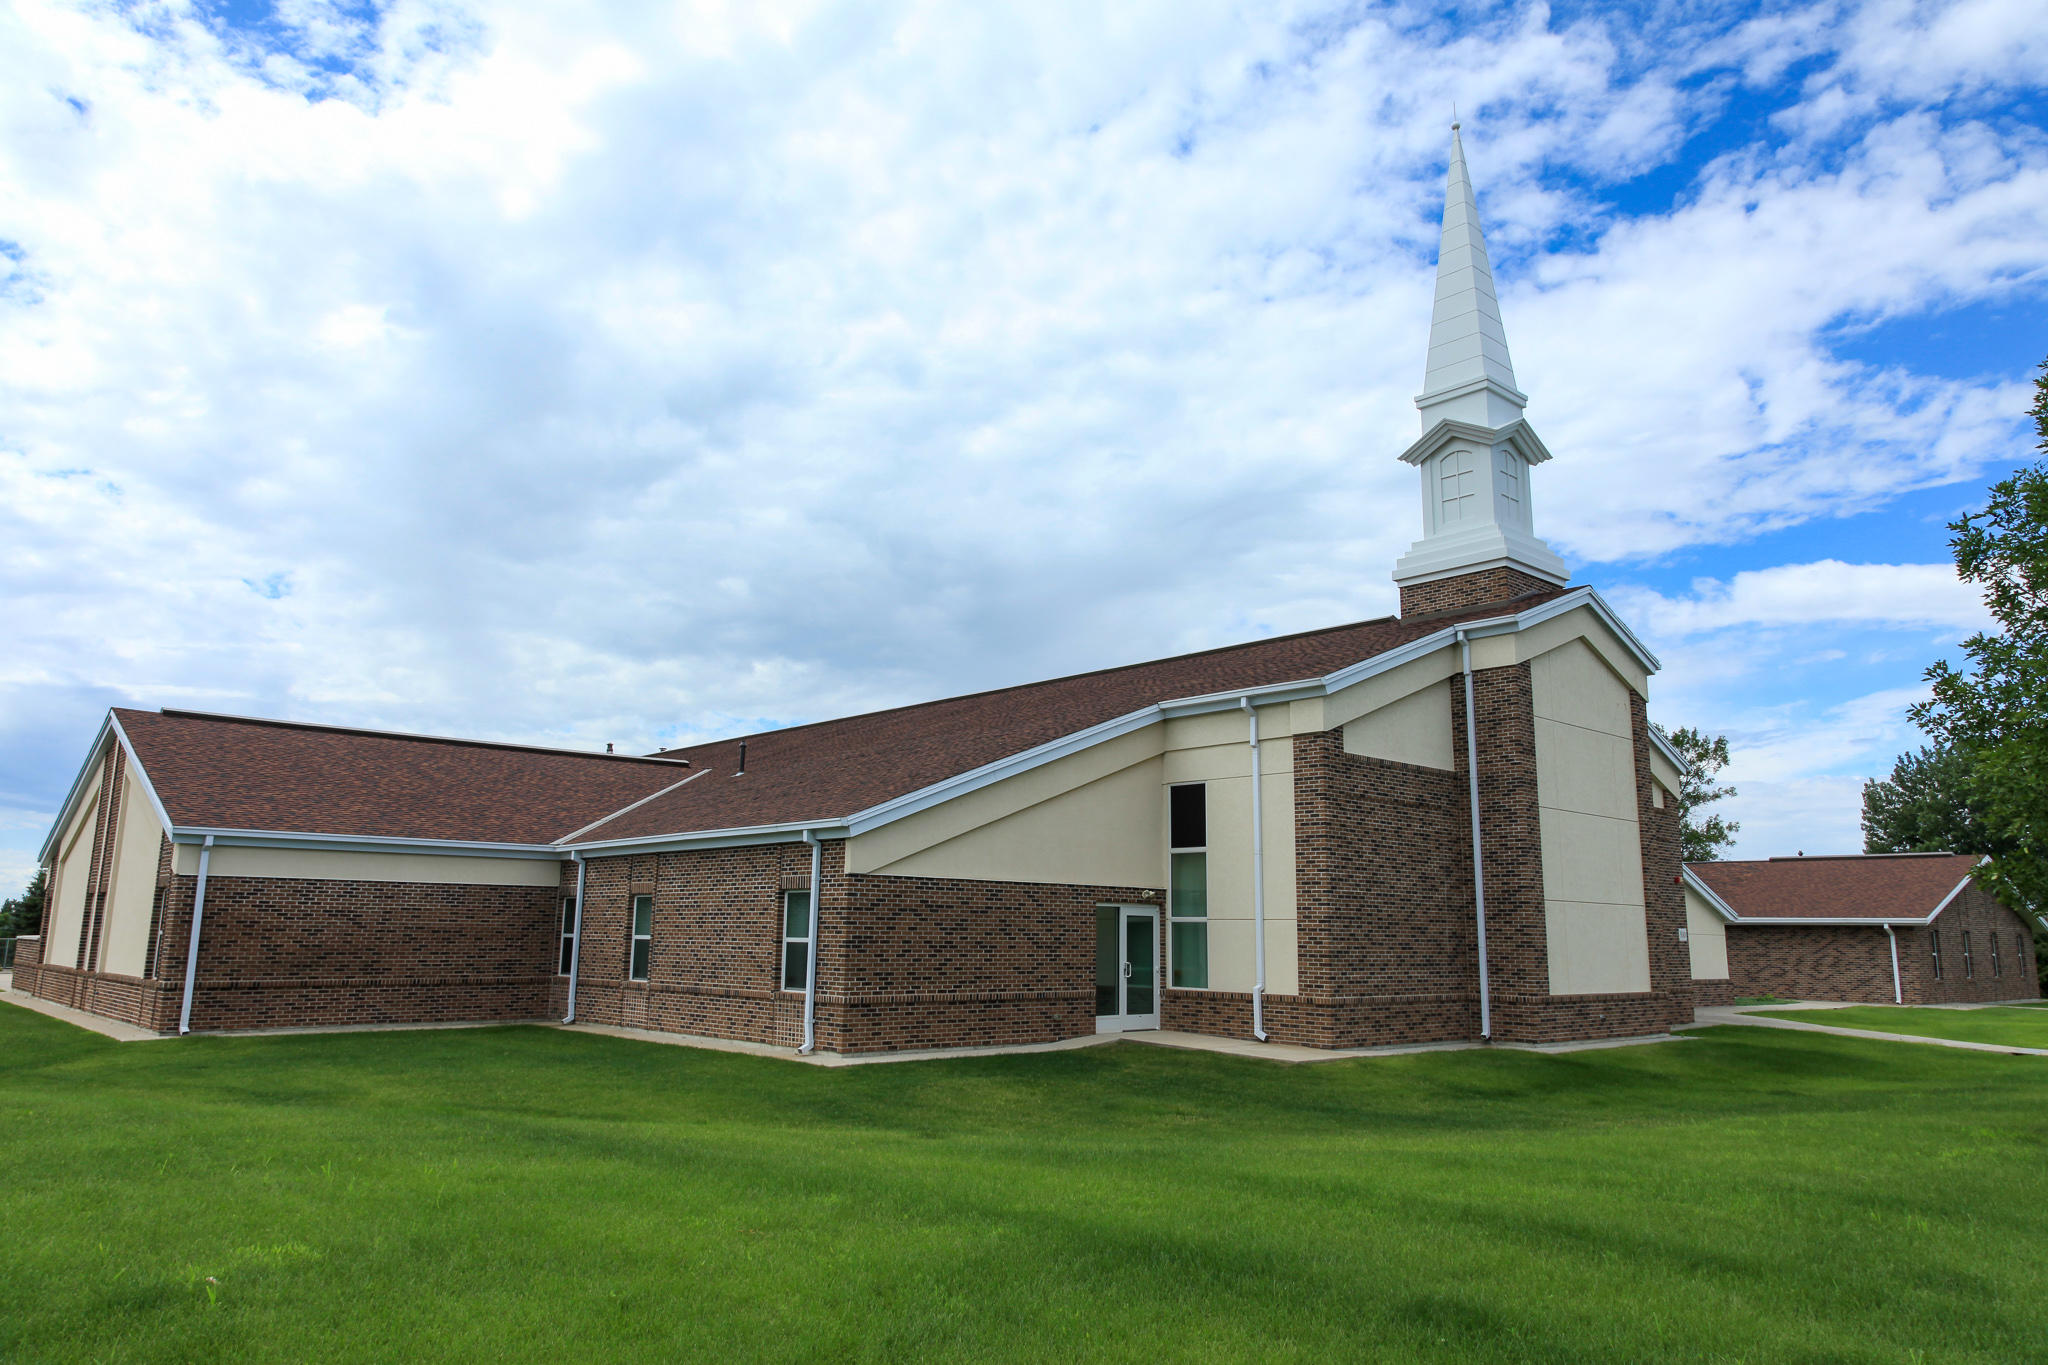 The Church of Jesus Christ of Latter-day Saints, Dickinson ND 58601-4194